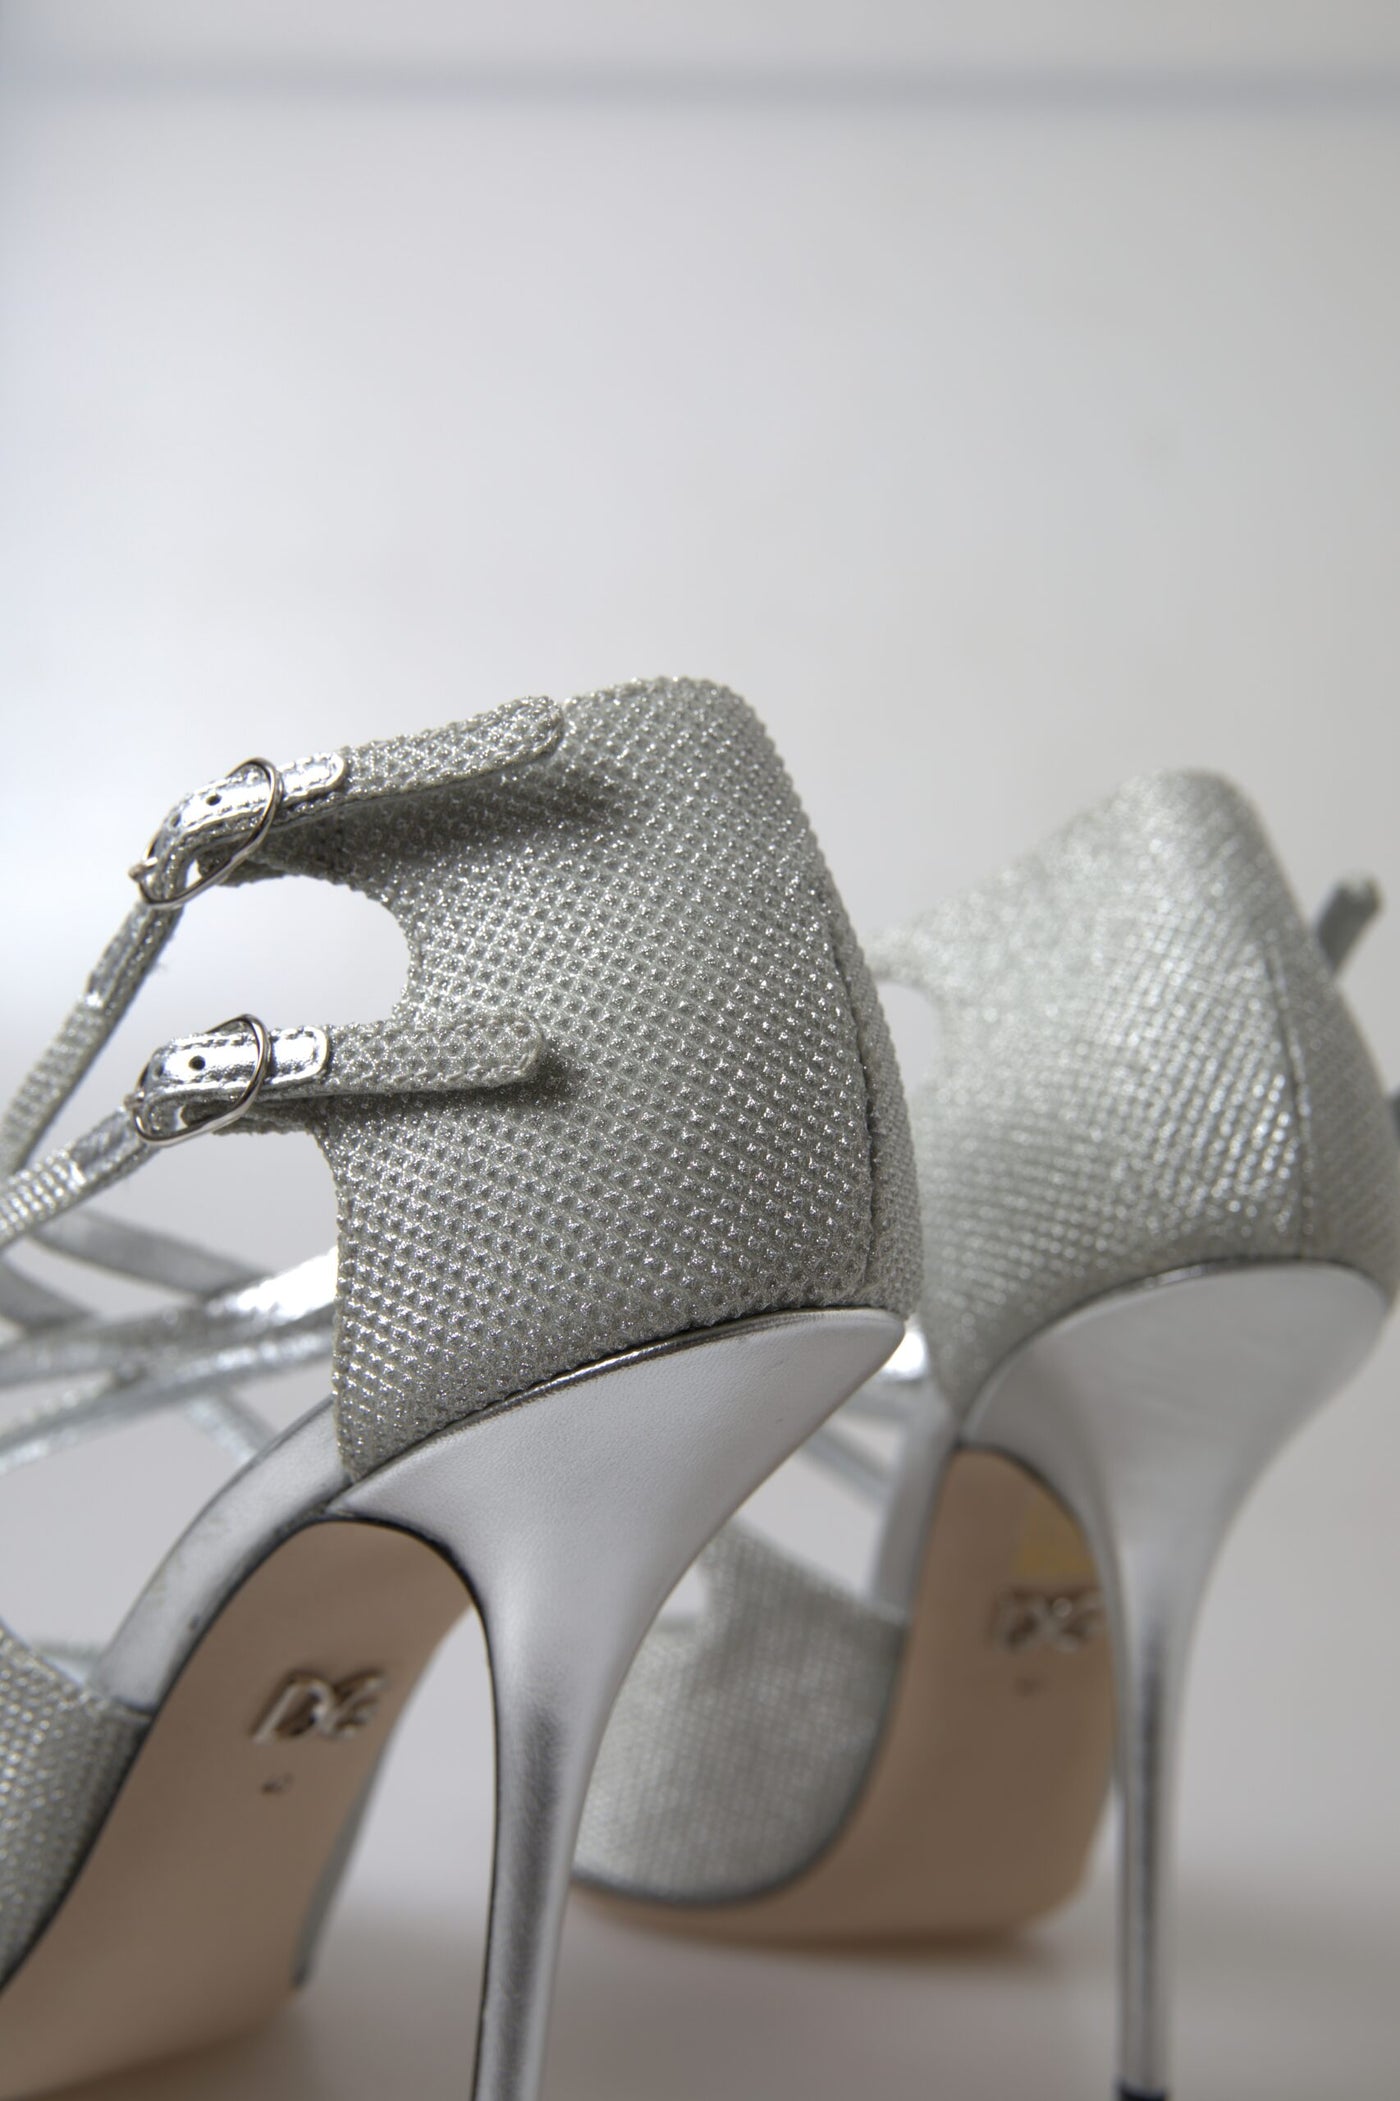 Dolce & Gabbana Silver Shimmers Sandals Heel Pumps Shoes